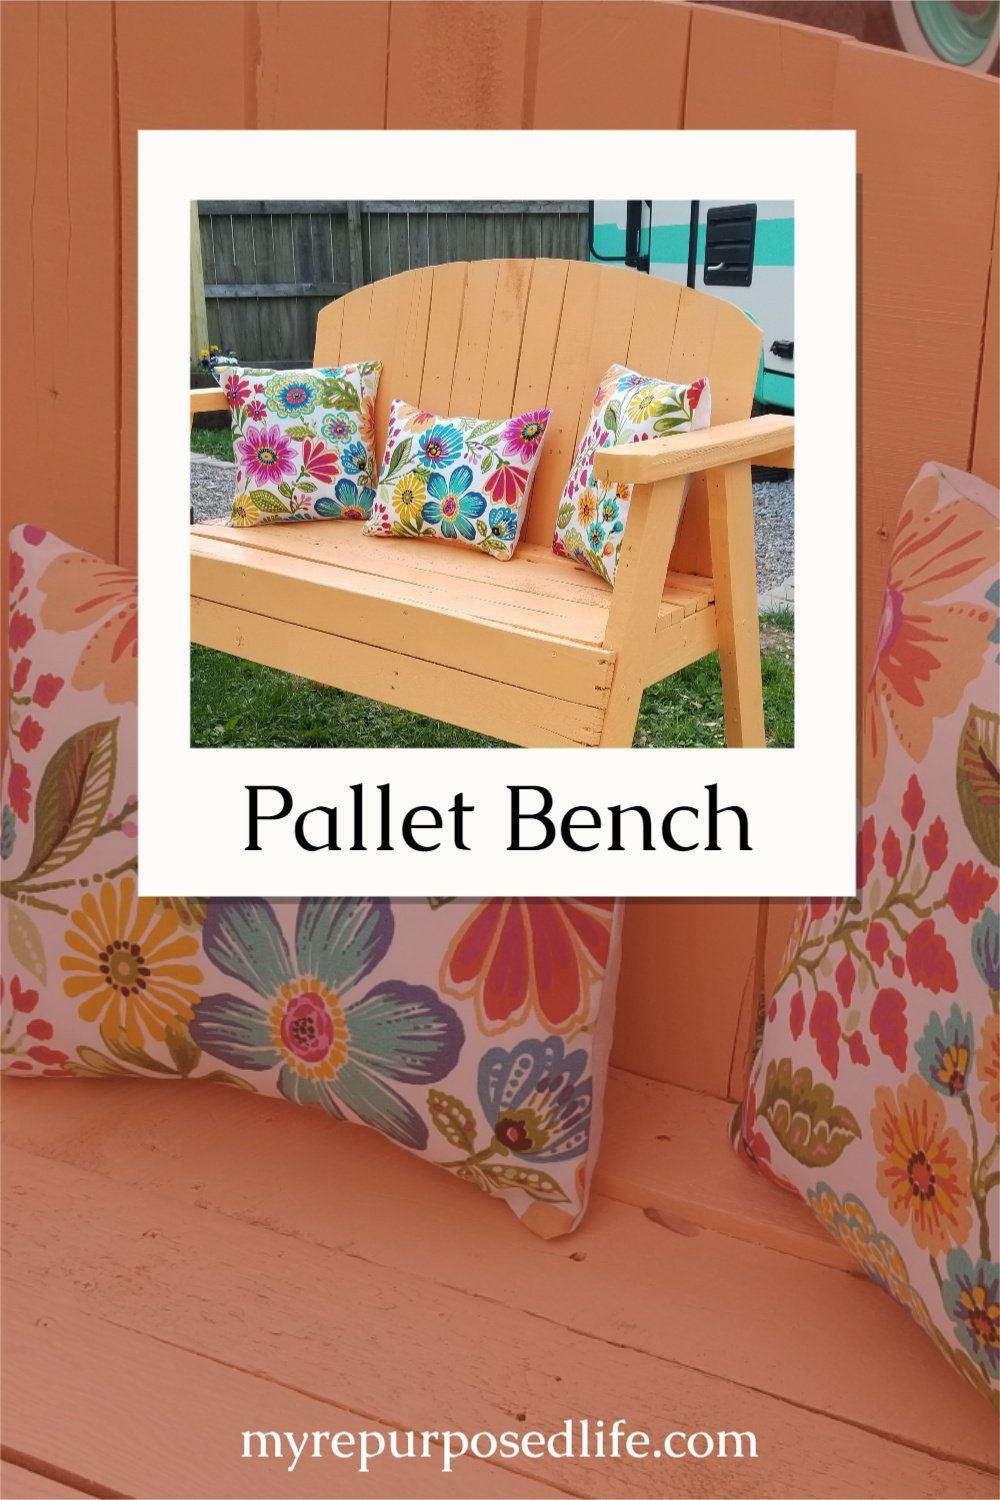 How to make an awesome garden pallet love seat bench. Using one pallet and a couple of reclaimed 2x4's you can easily follow this step by step tutorial. #MyRepurposedLife #repurposed #pallet #loveseat #bench via @repurposedlife